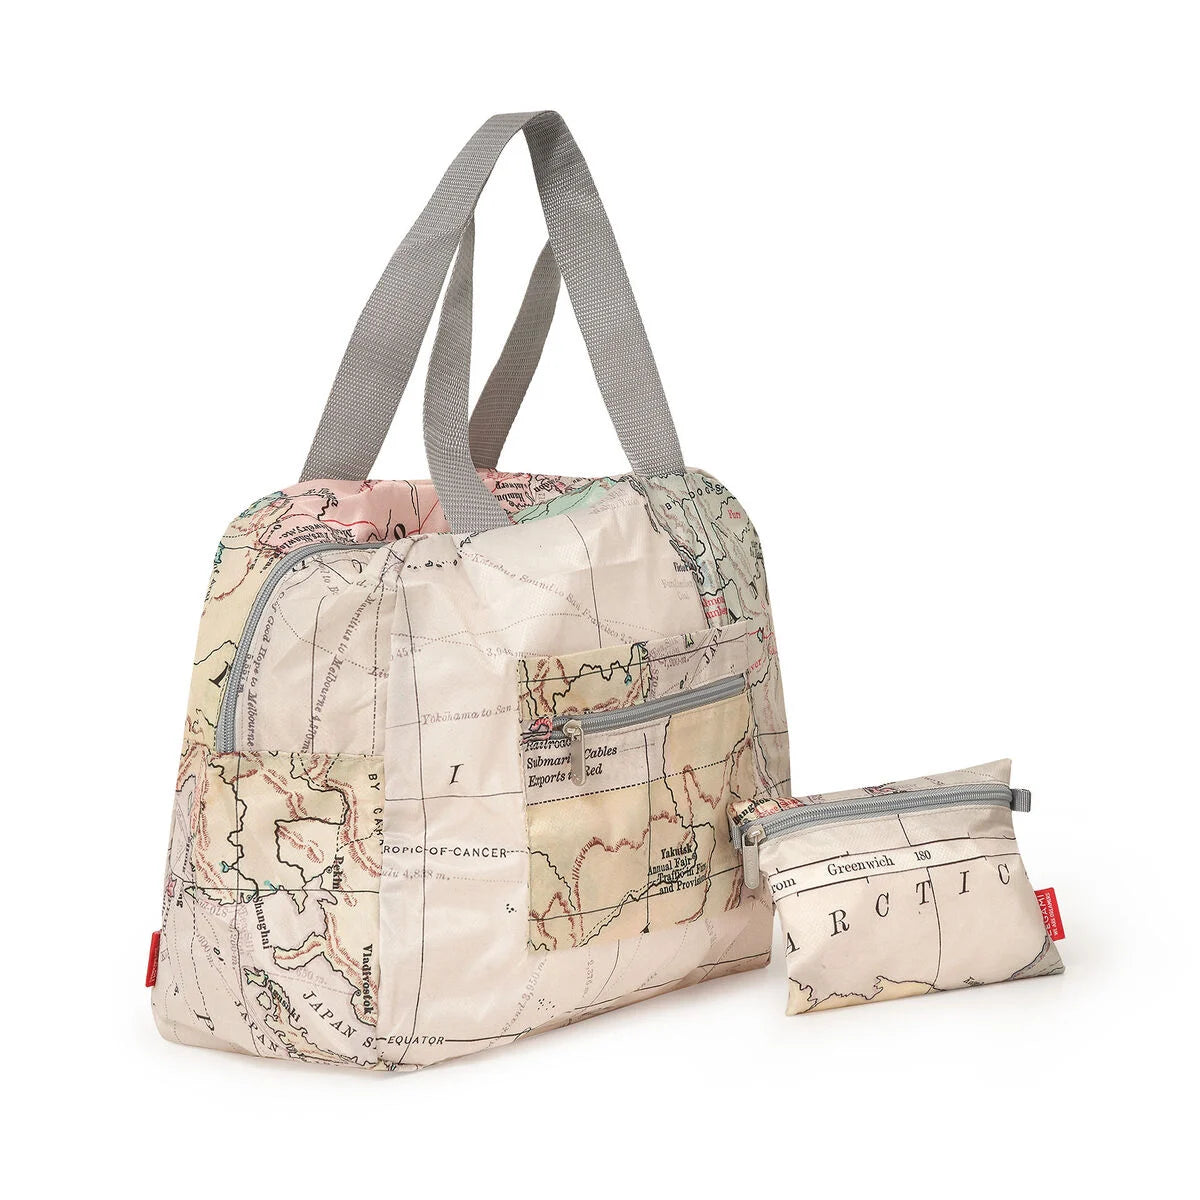 Fabulous Gifts Food Storage Legami Foldable Travel Bag - Travel by Weirs of Baggot Street